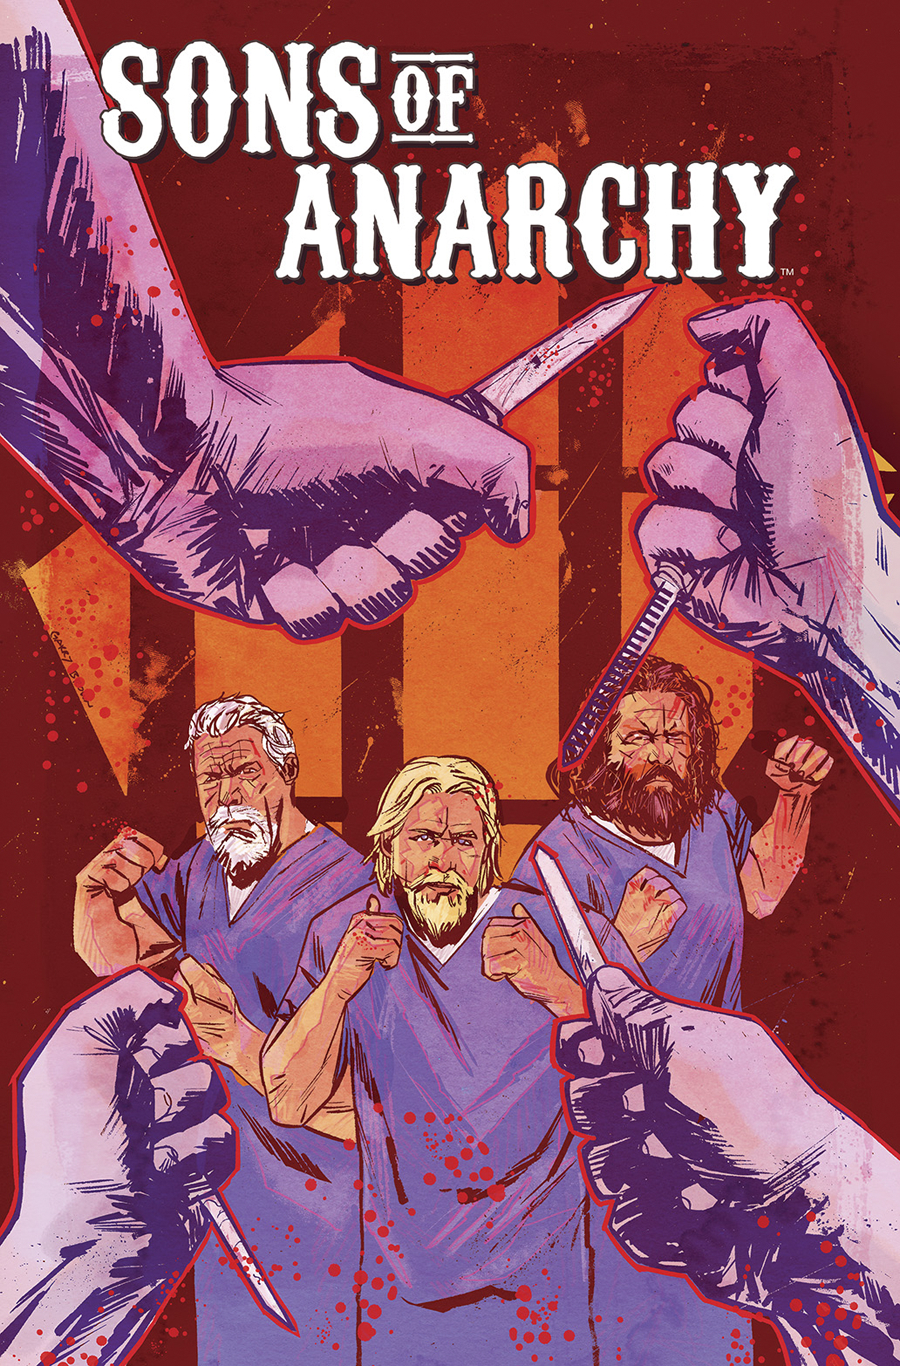 SONS OF ANARCHY #10 (MR)